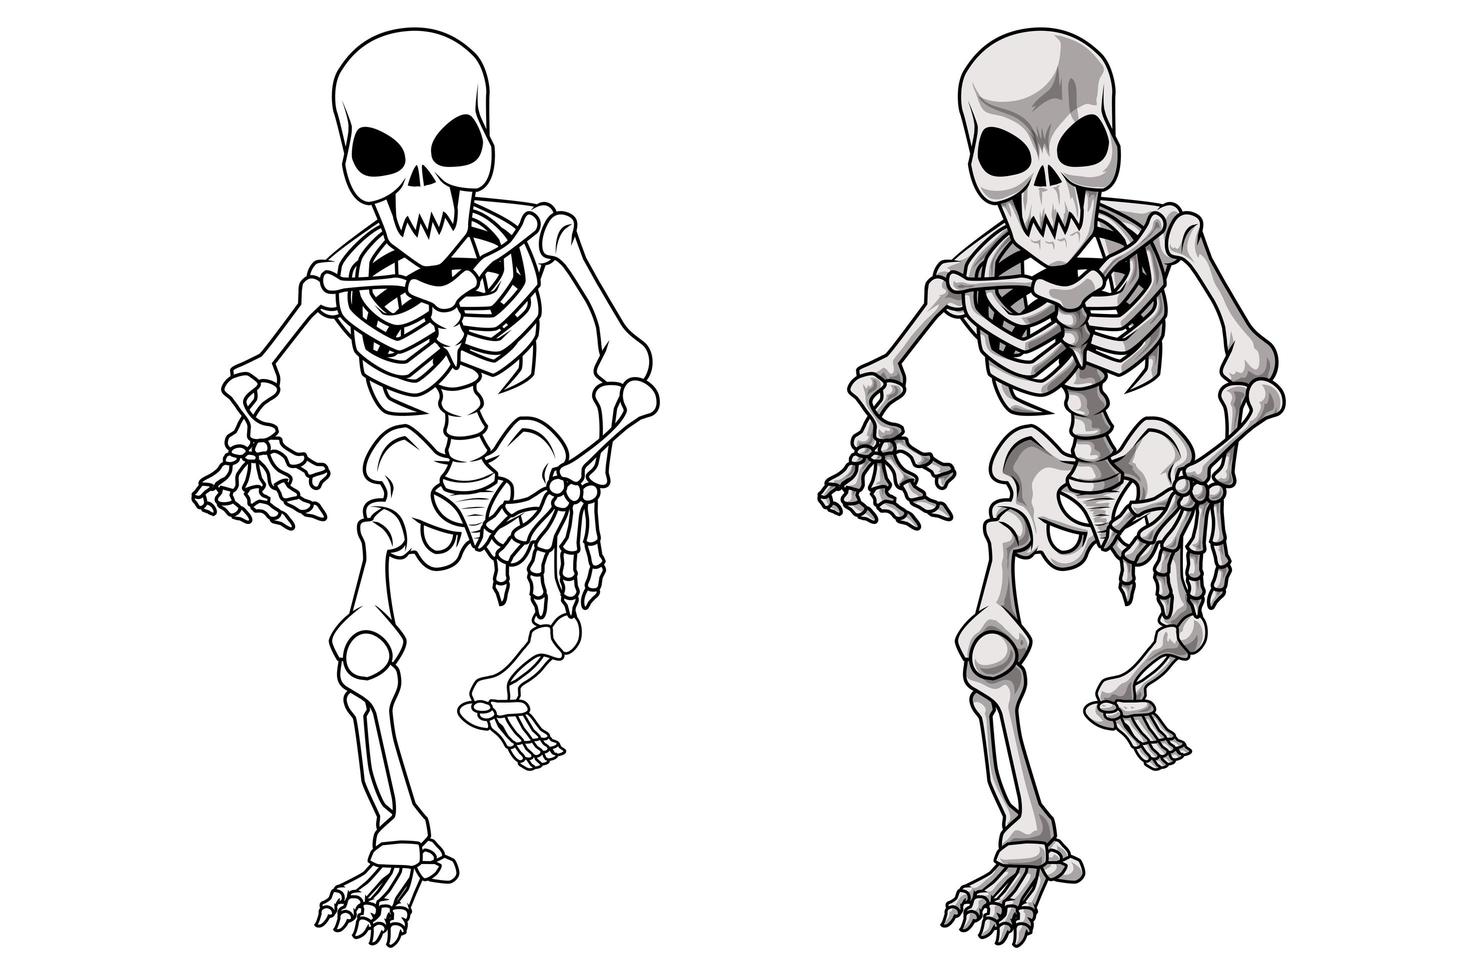 Skeleton cartoon coloring page for kids vector